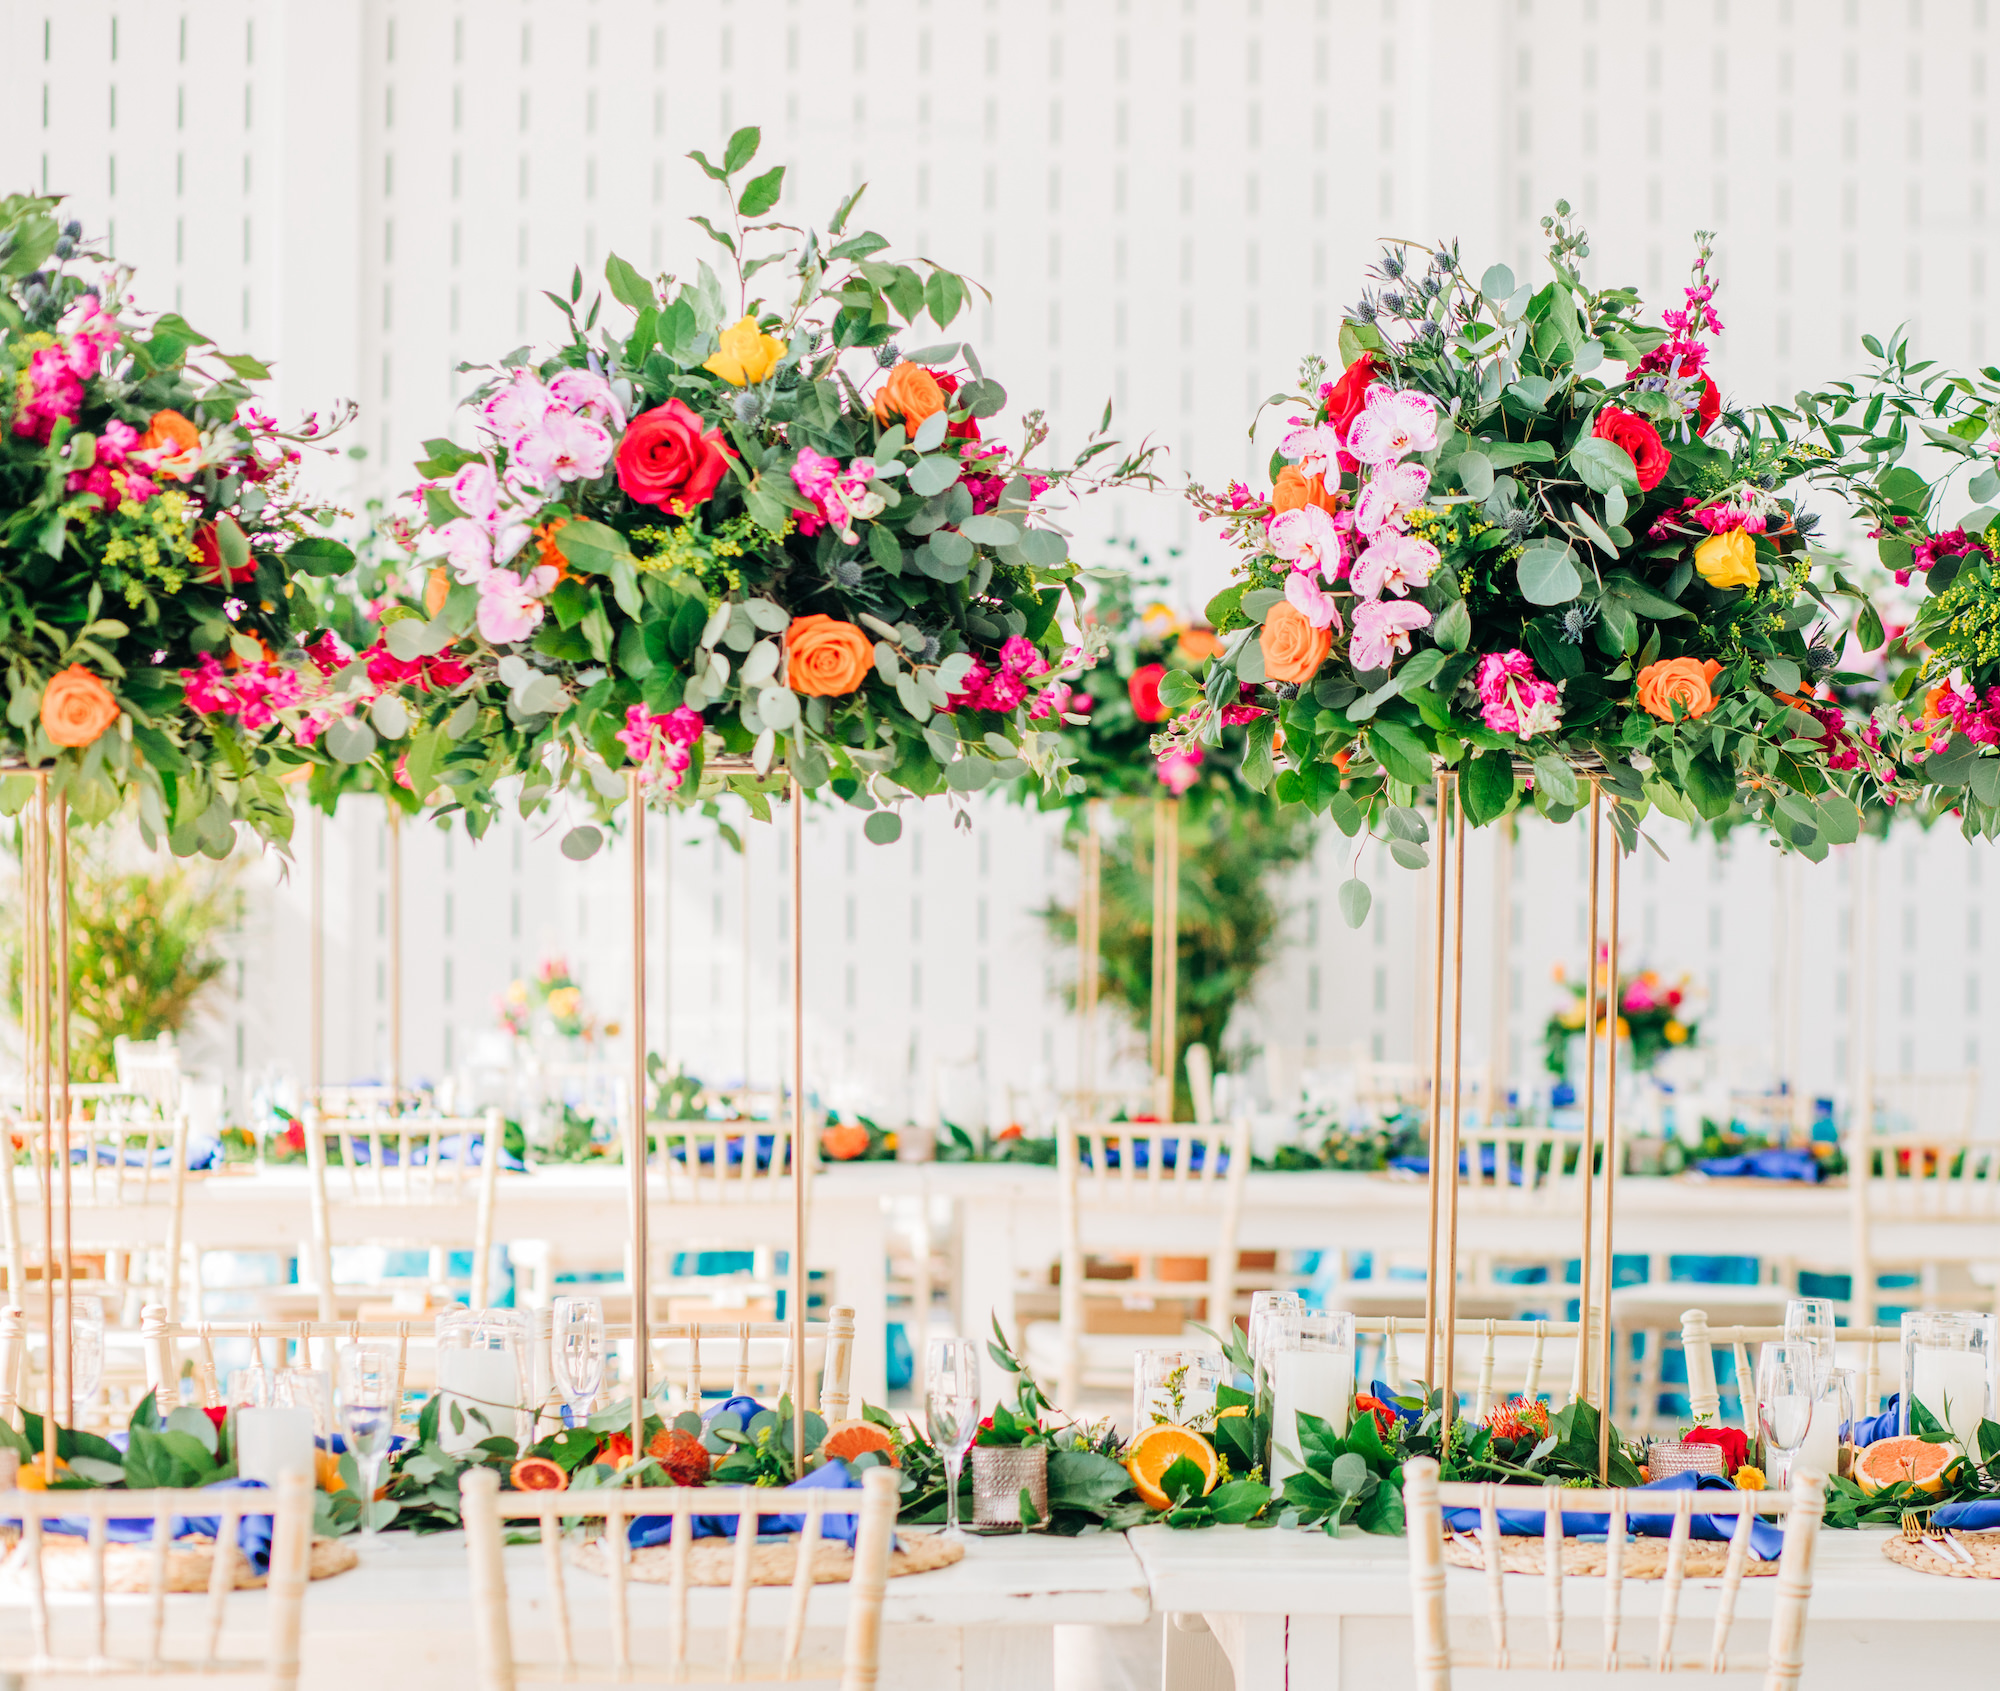 Vibrant Colorful Wedding Reception Decor, Long Tables with Tall Gold Stands and Lush Greenery, Red and Orange Roses, Pink Orchids, Eucalyptus, Floral Centerpieces | Tampa Bay Wedding Rentals A Chair Affair | Kate Ryan Event Rentals